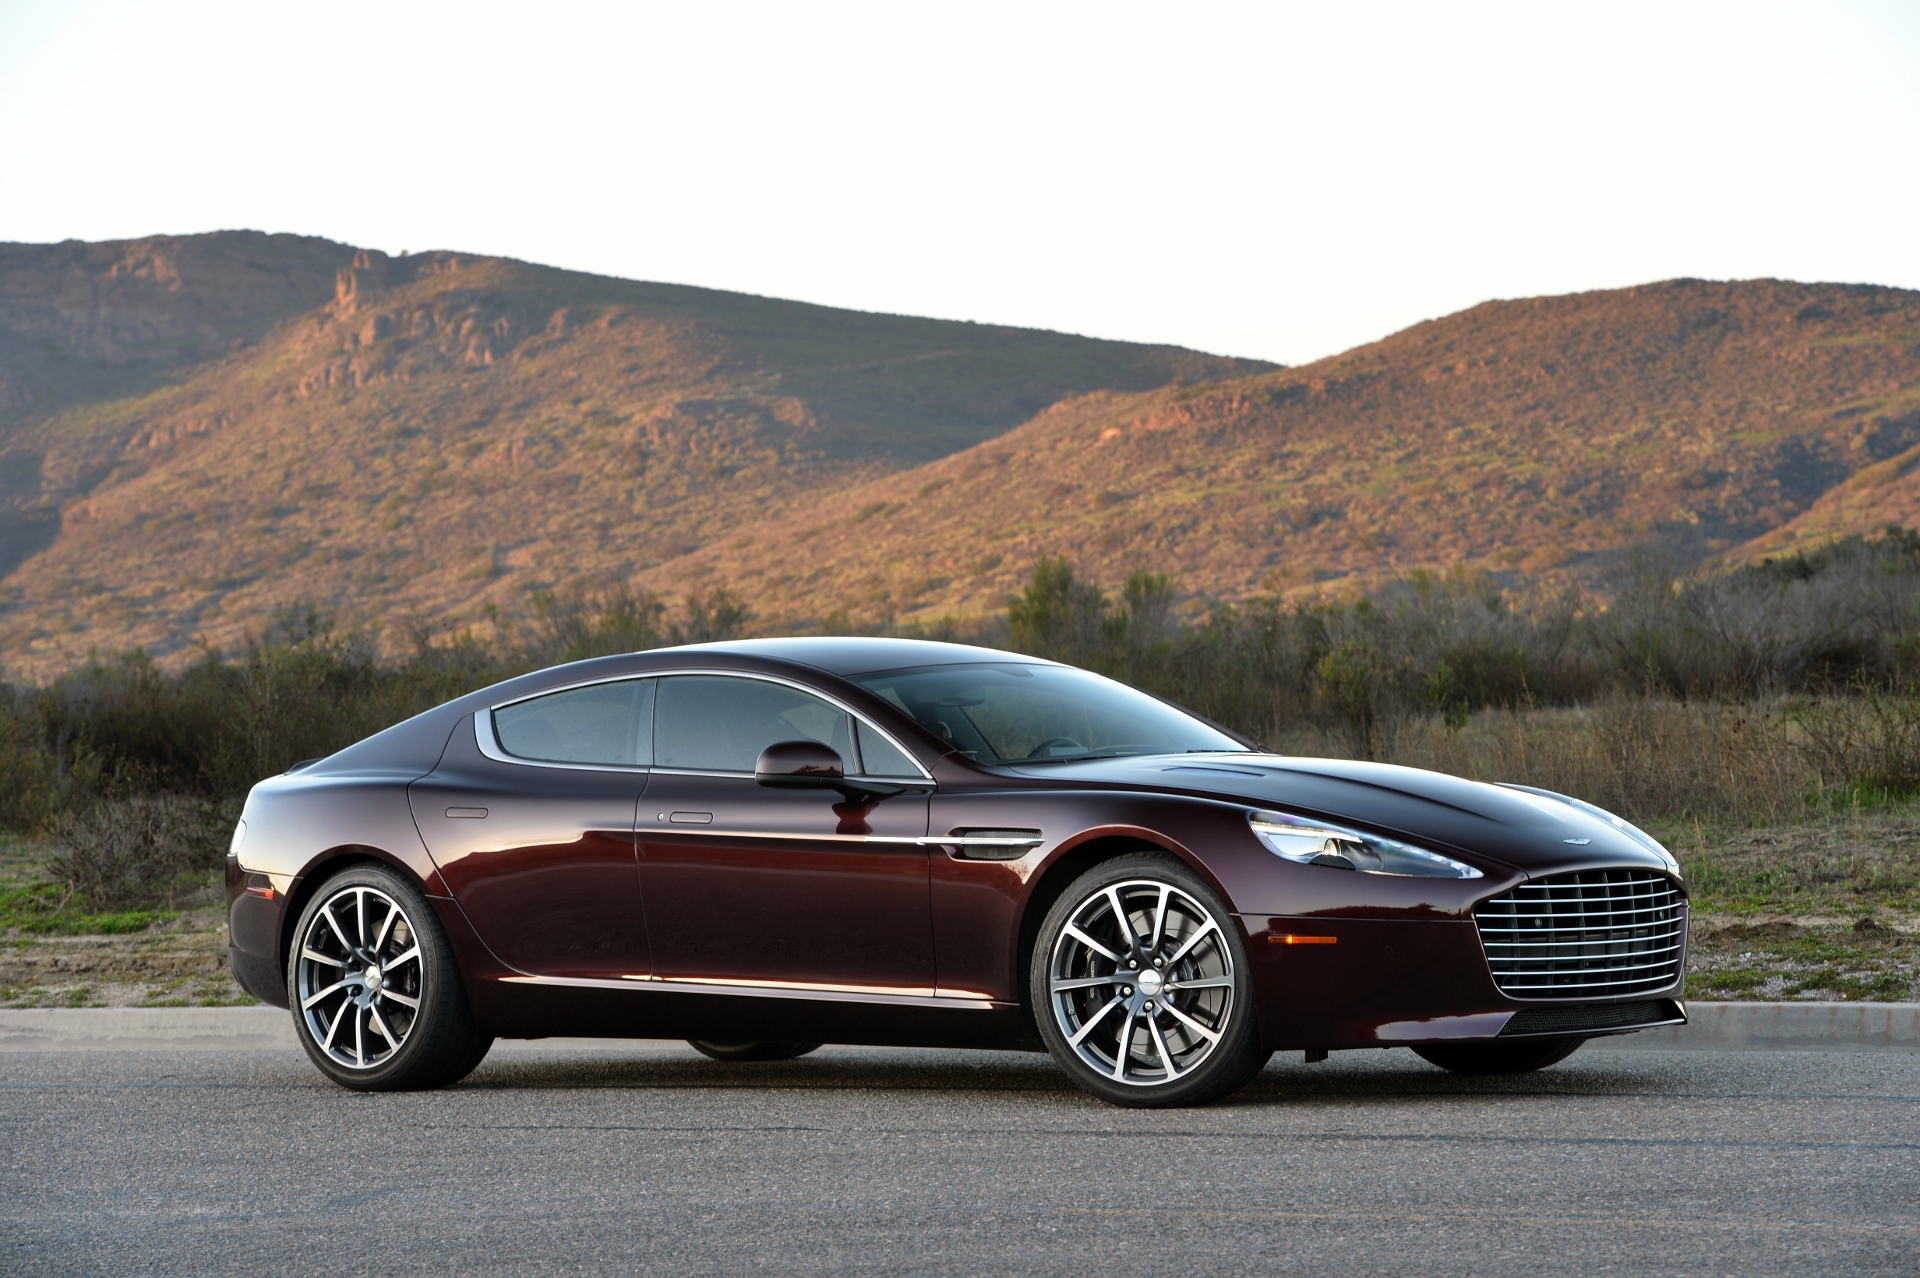 2016 Aston Martin Rapide Summary Review - The Car Connection